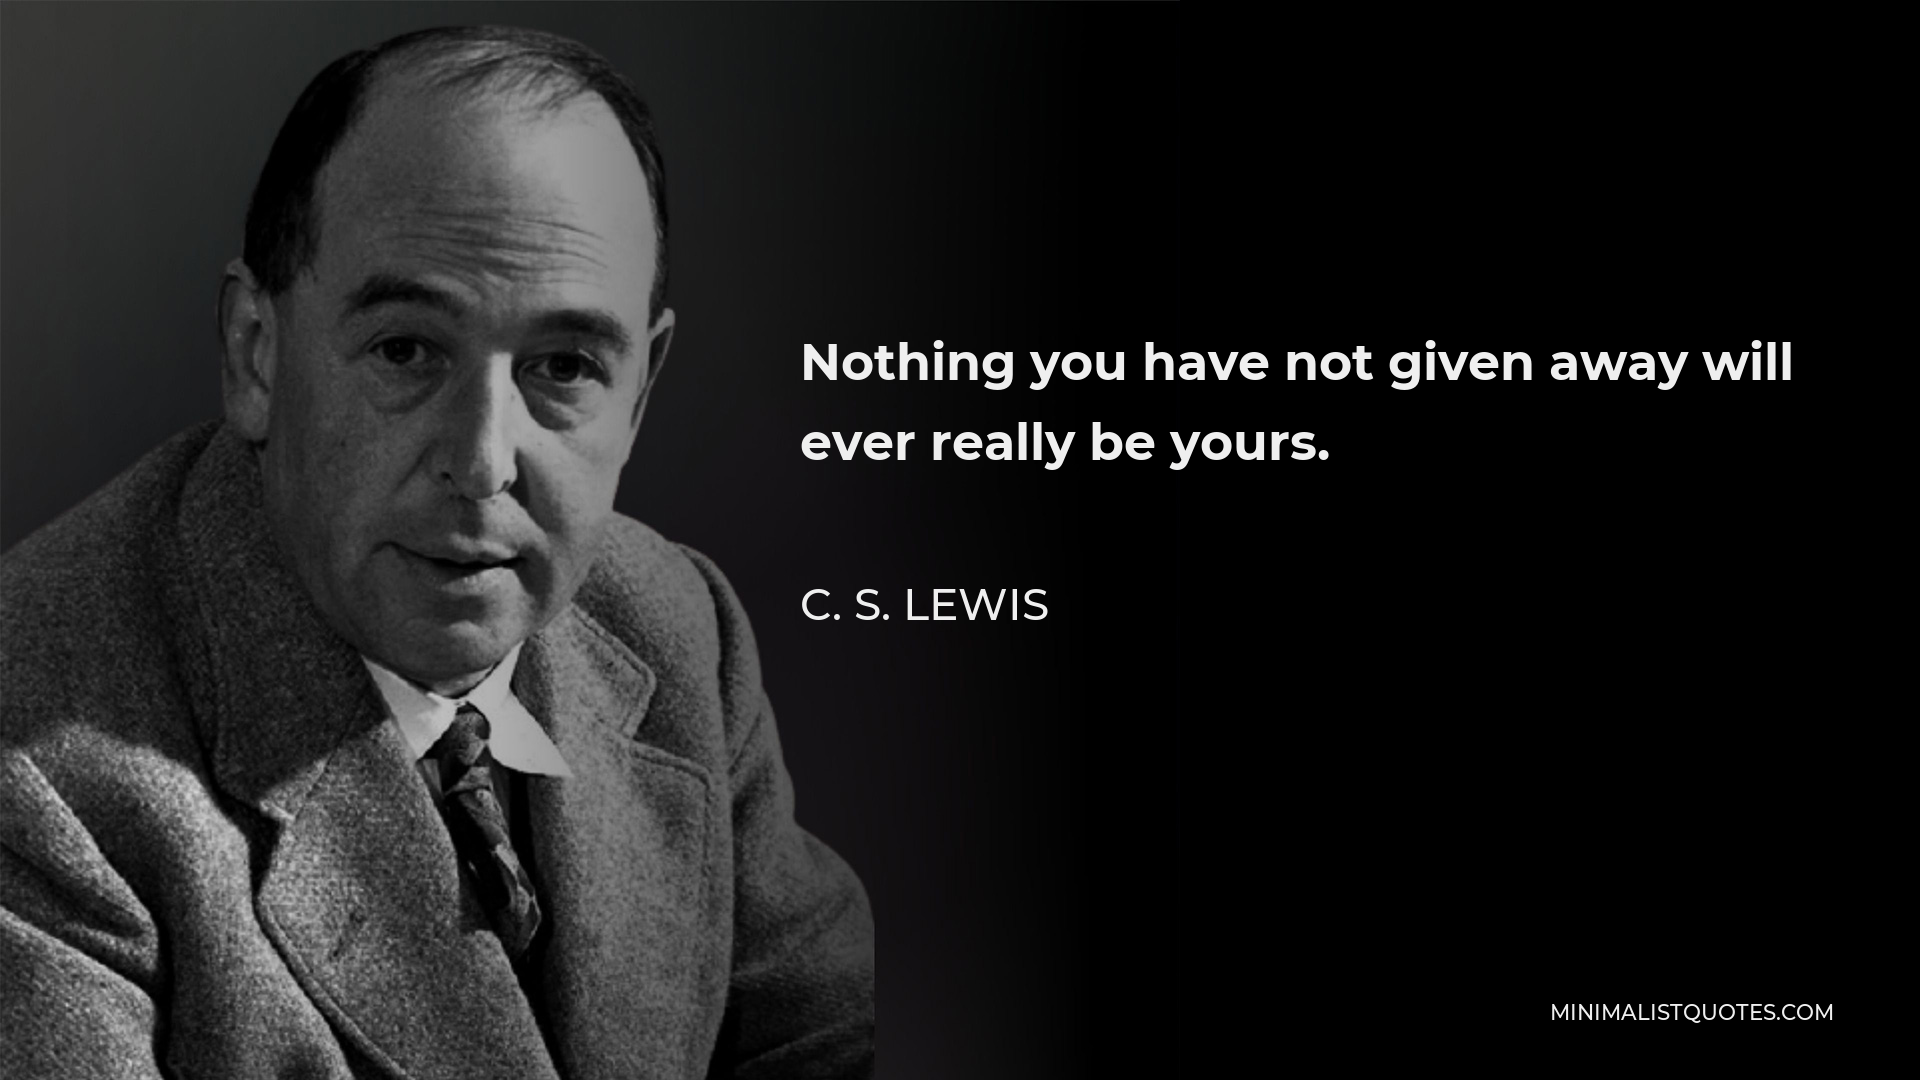 C. S. Lewis Quote - Nothing you have not given away will ever really be yours.